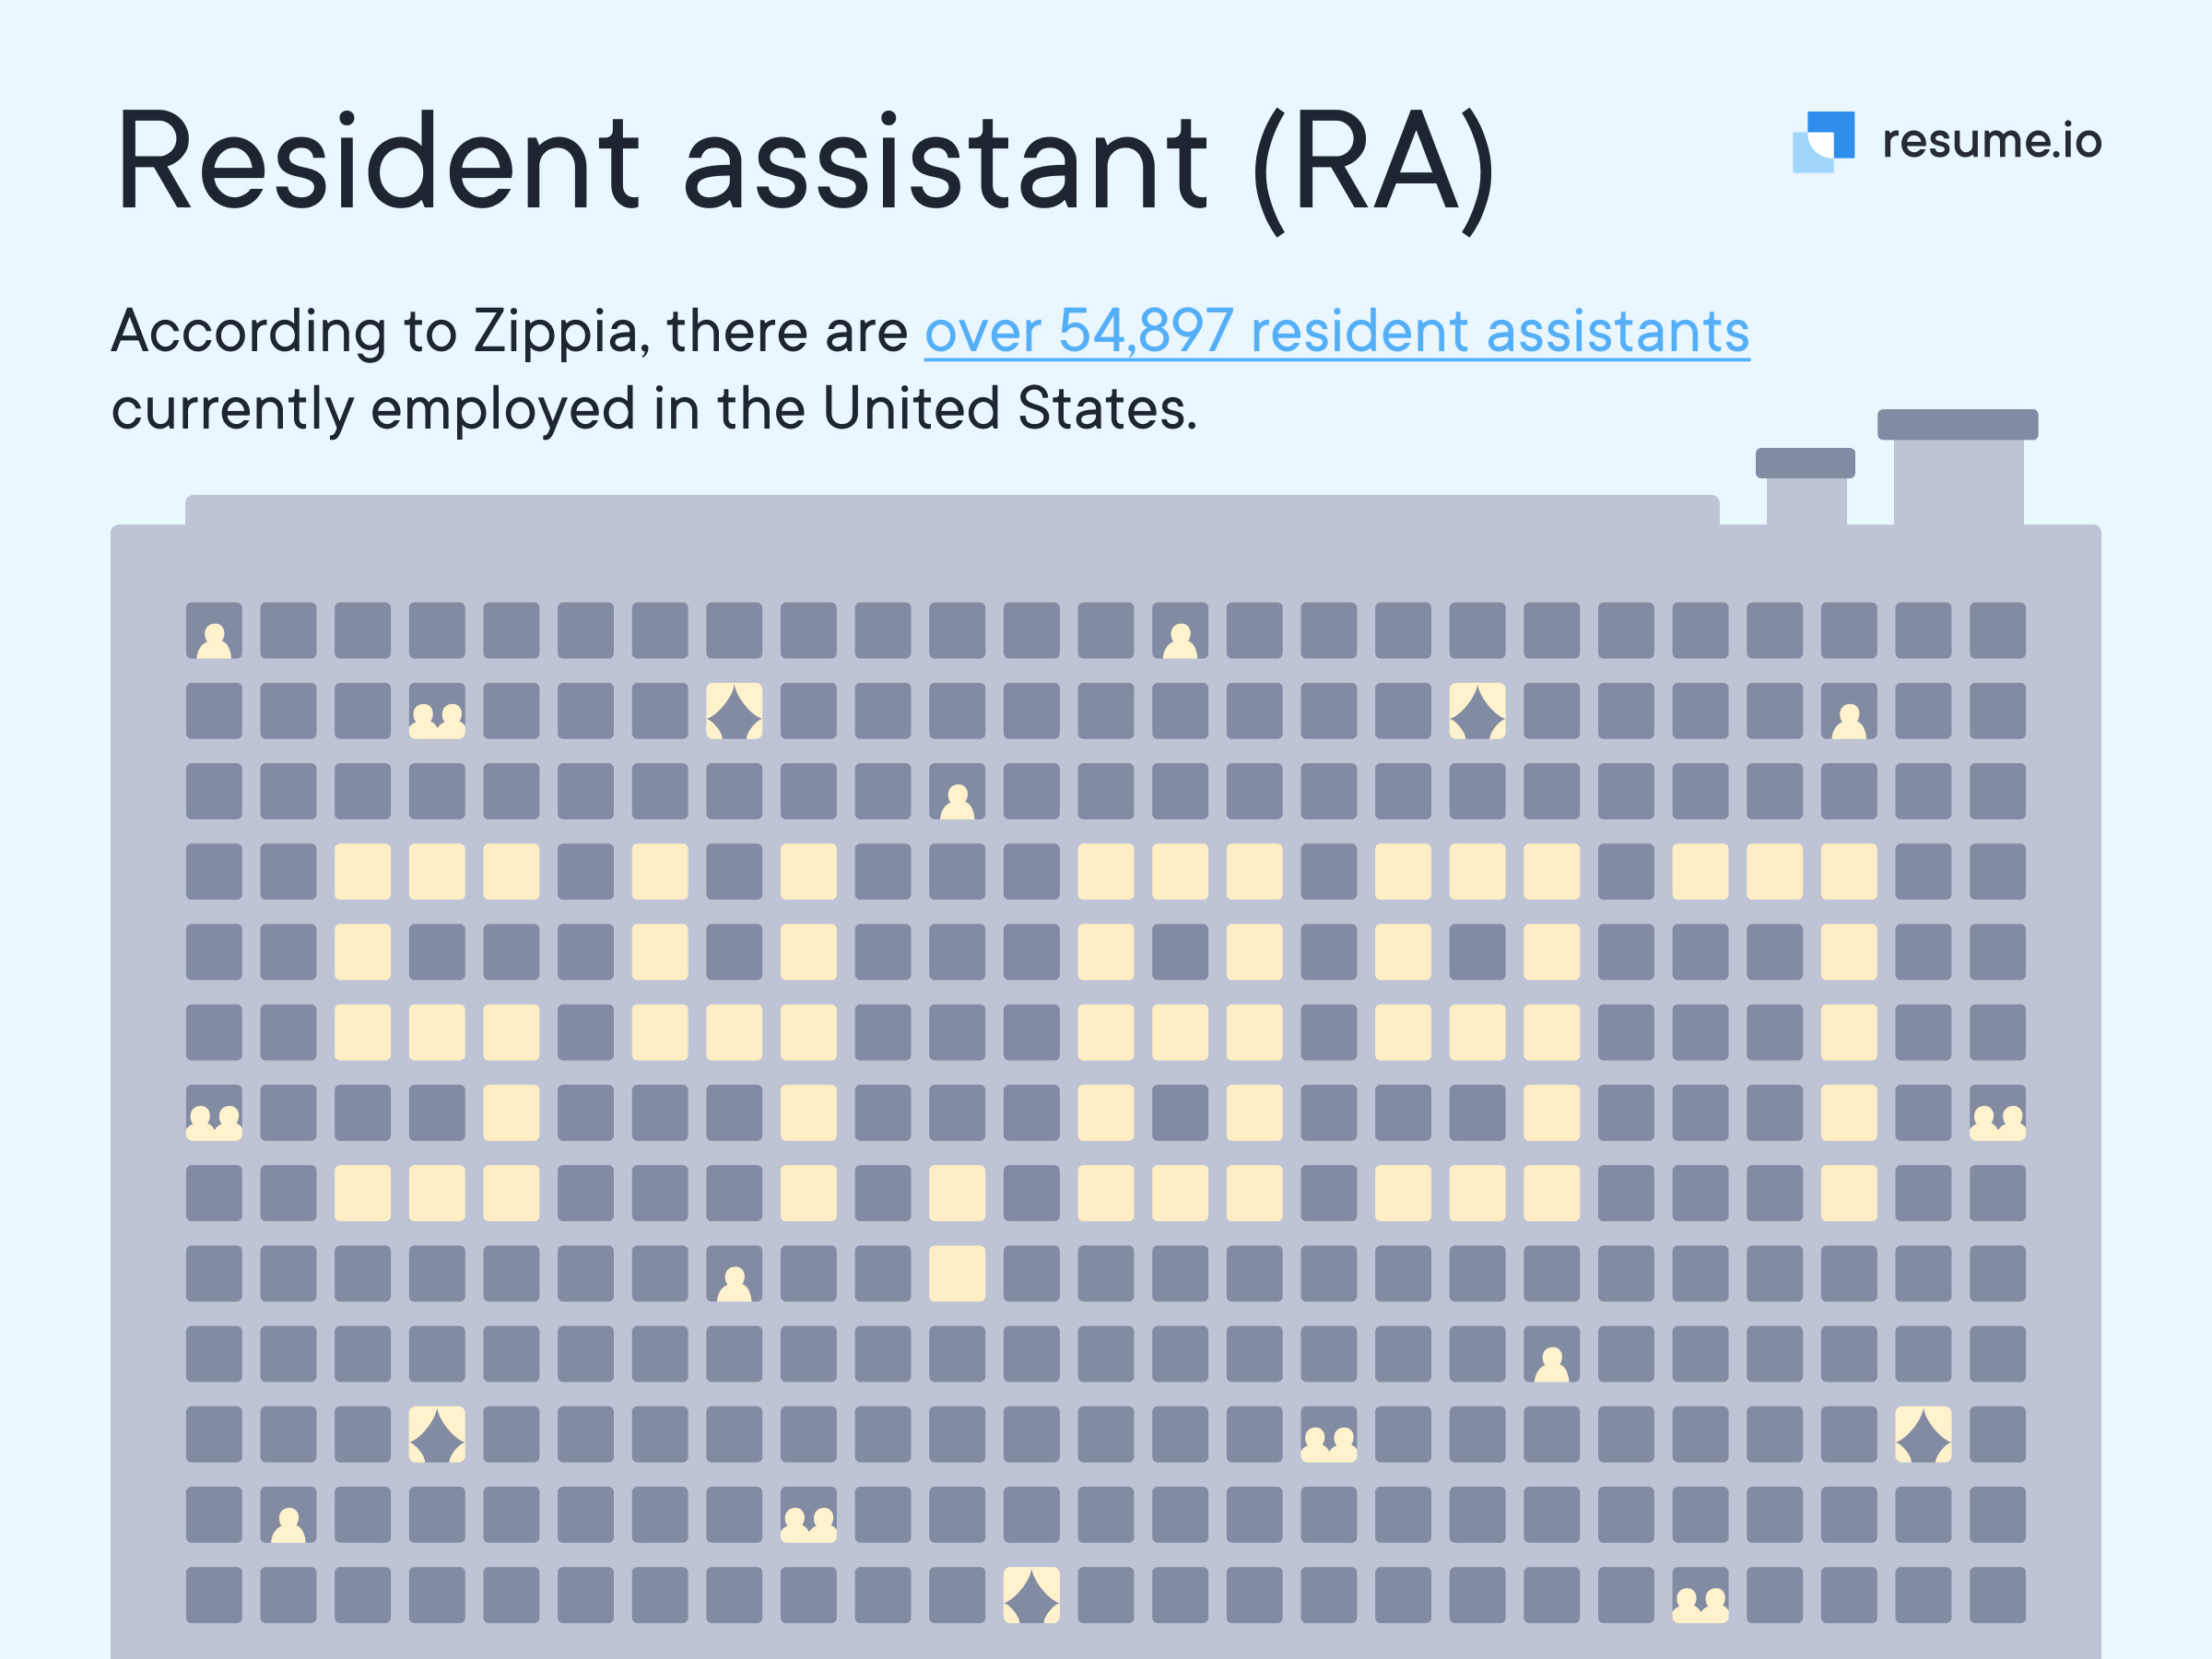 Building with the number of resident assistants currently employed in the United States